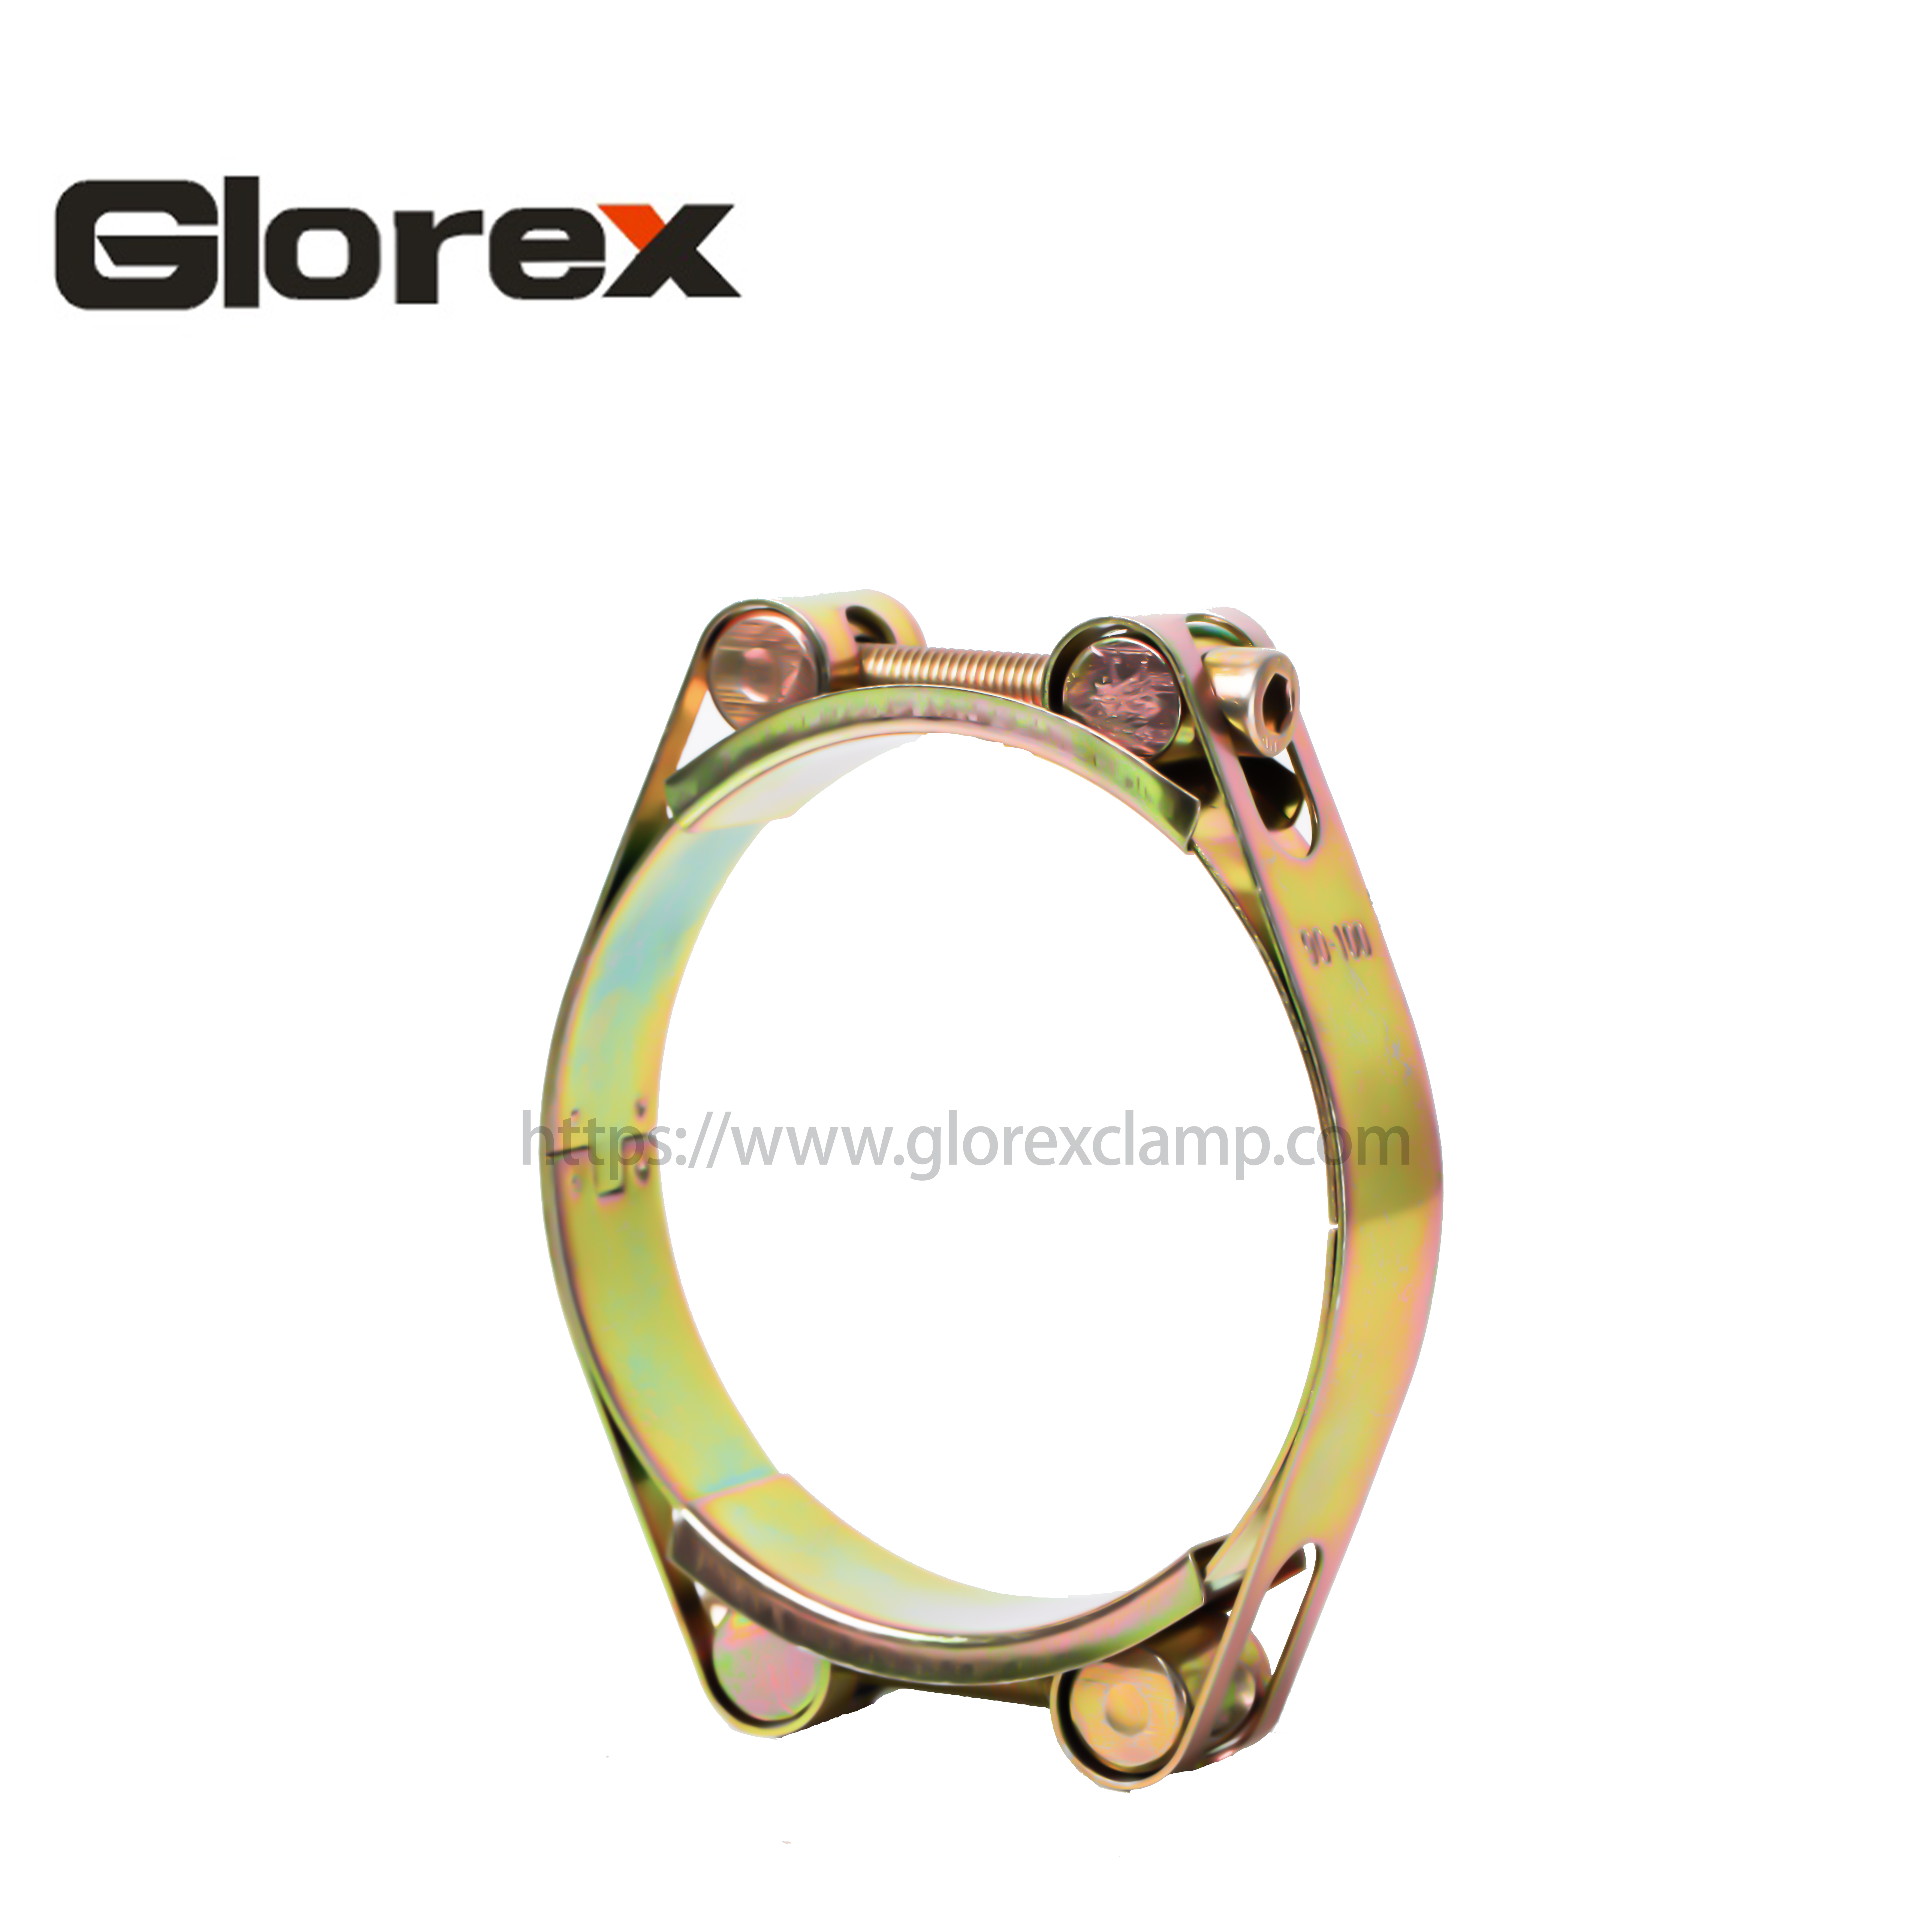 Chinese Professional T-Bolt Clamp - Robust clamp with double bolts – Glorex